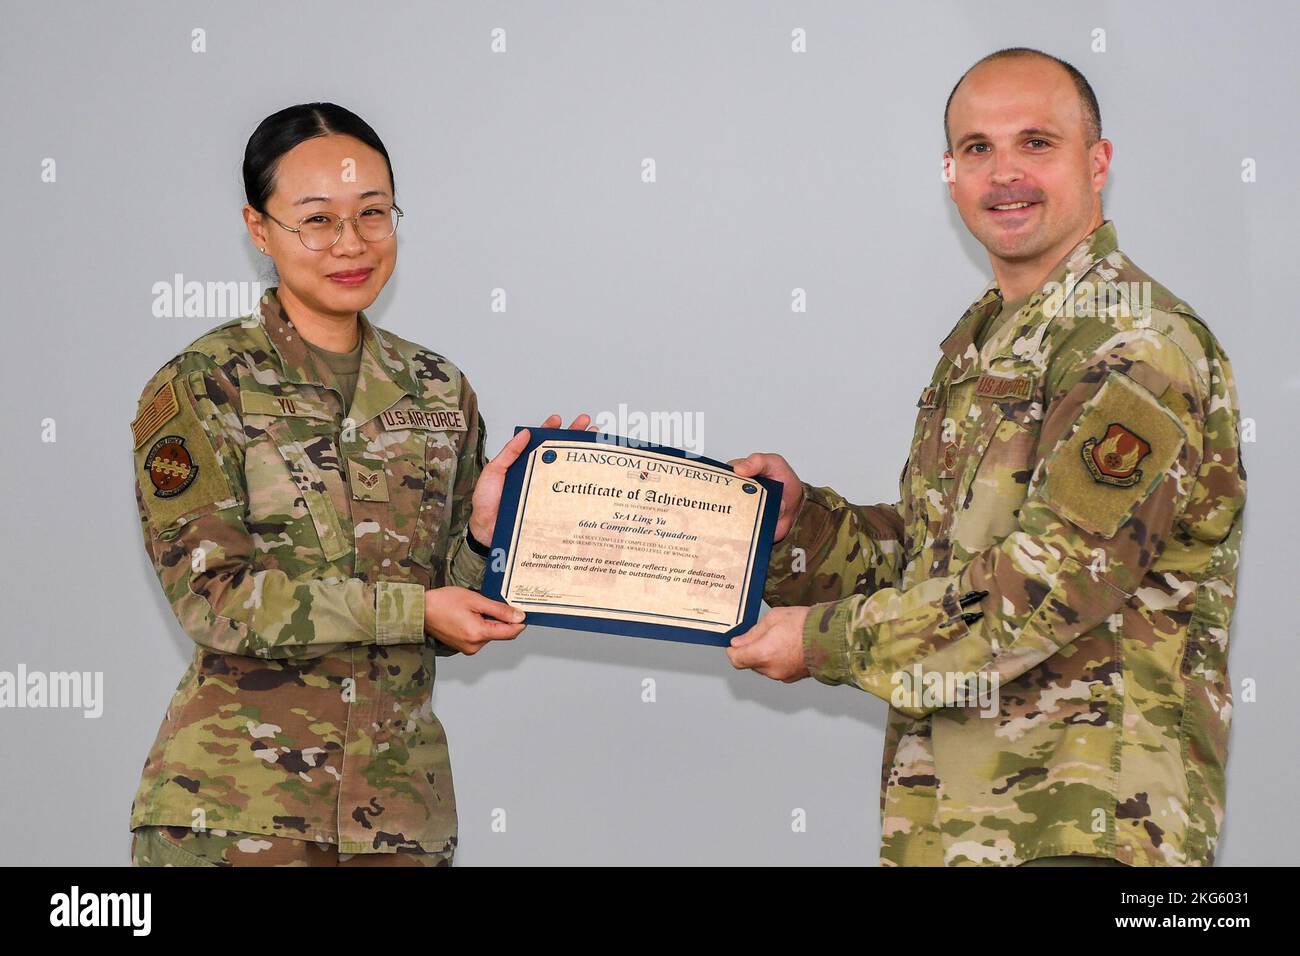 Master Sgt. Michael Kennedy, Hanscom career assistance advisor, presents Senior Airman Ling Yu, 66th Comptroller Squadron financial analyst, with a Hanscom University certificate of achievement at Hanscom Air Force Base, Mass., Oct 6. Yu received a certificate for completed courses at Hanscom University to earn her Wingman Level.  To achieve Wingman Level, Yu completed four core, one intermediate and one advanced class, as well as a course project. Stock Photo